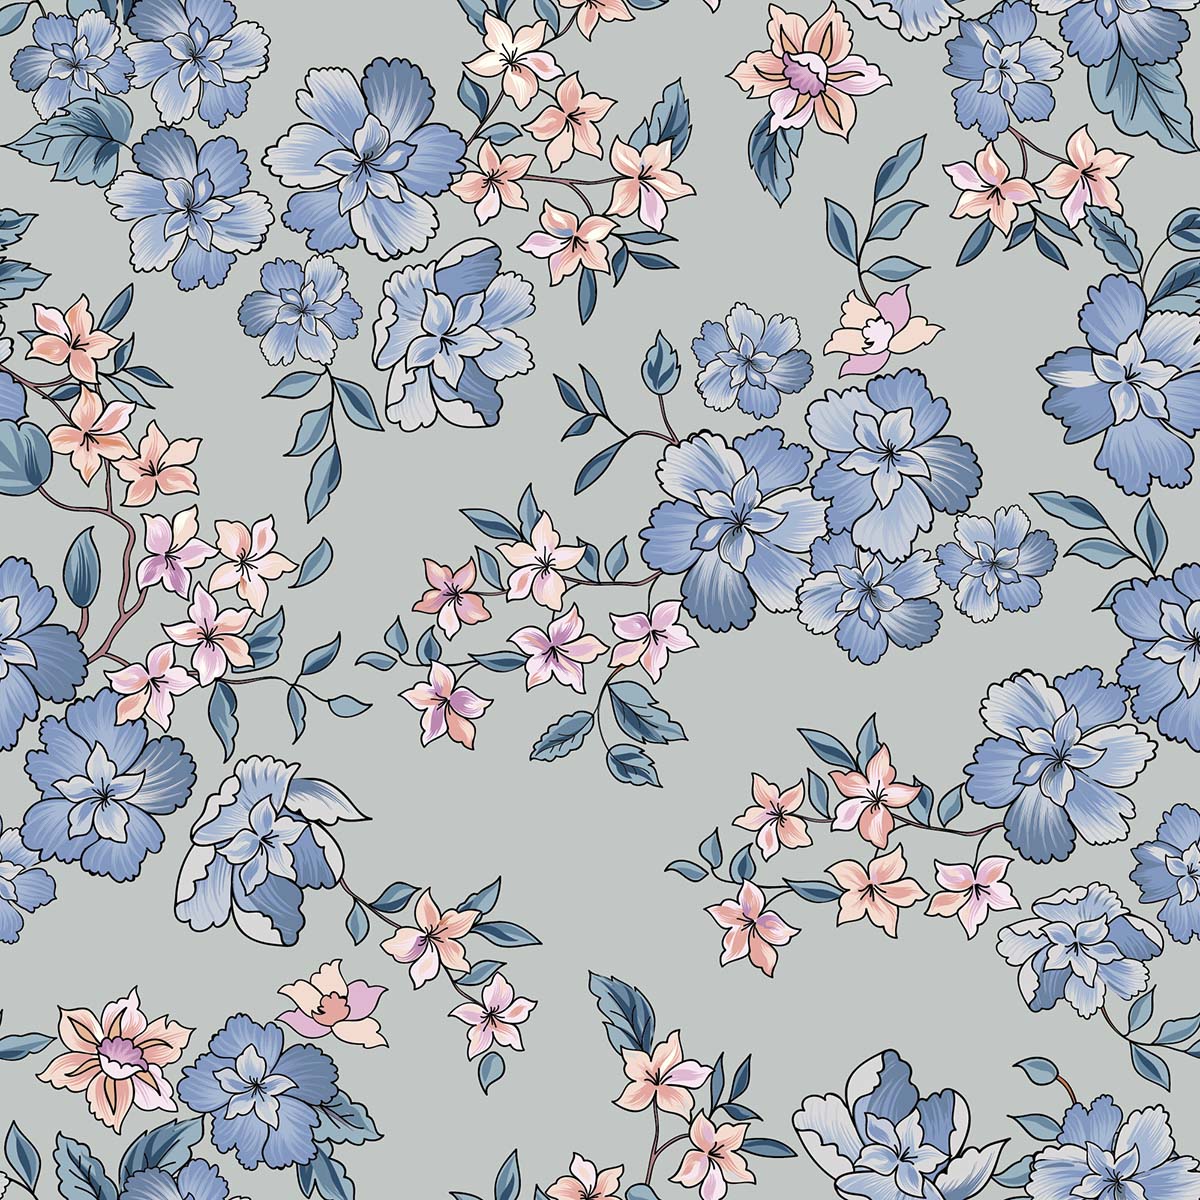 A pattern of flowers on a grey background